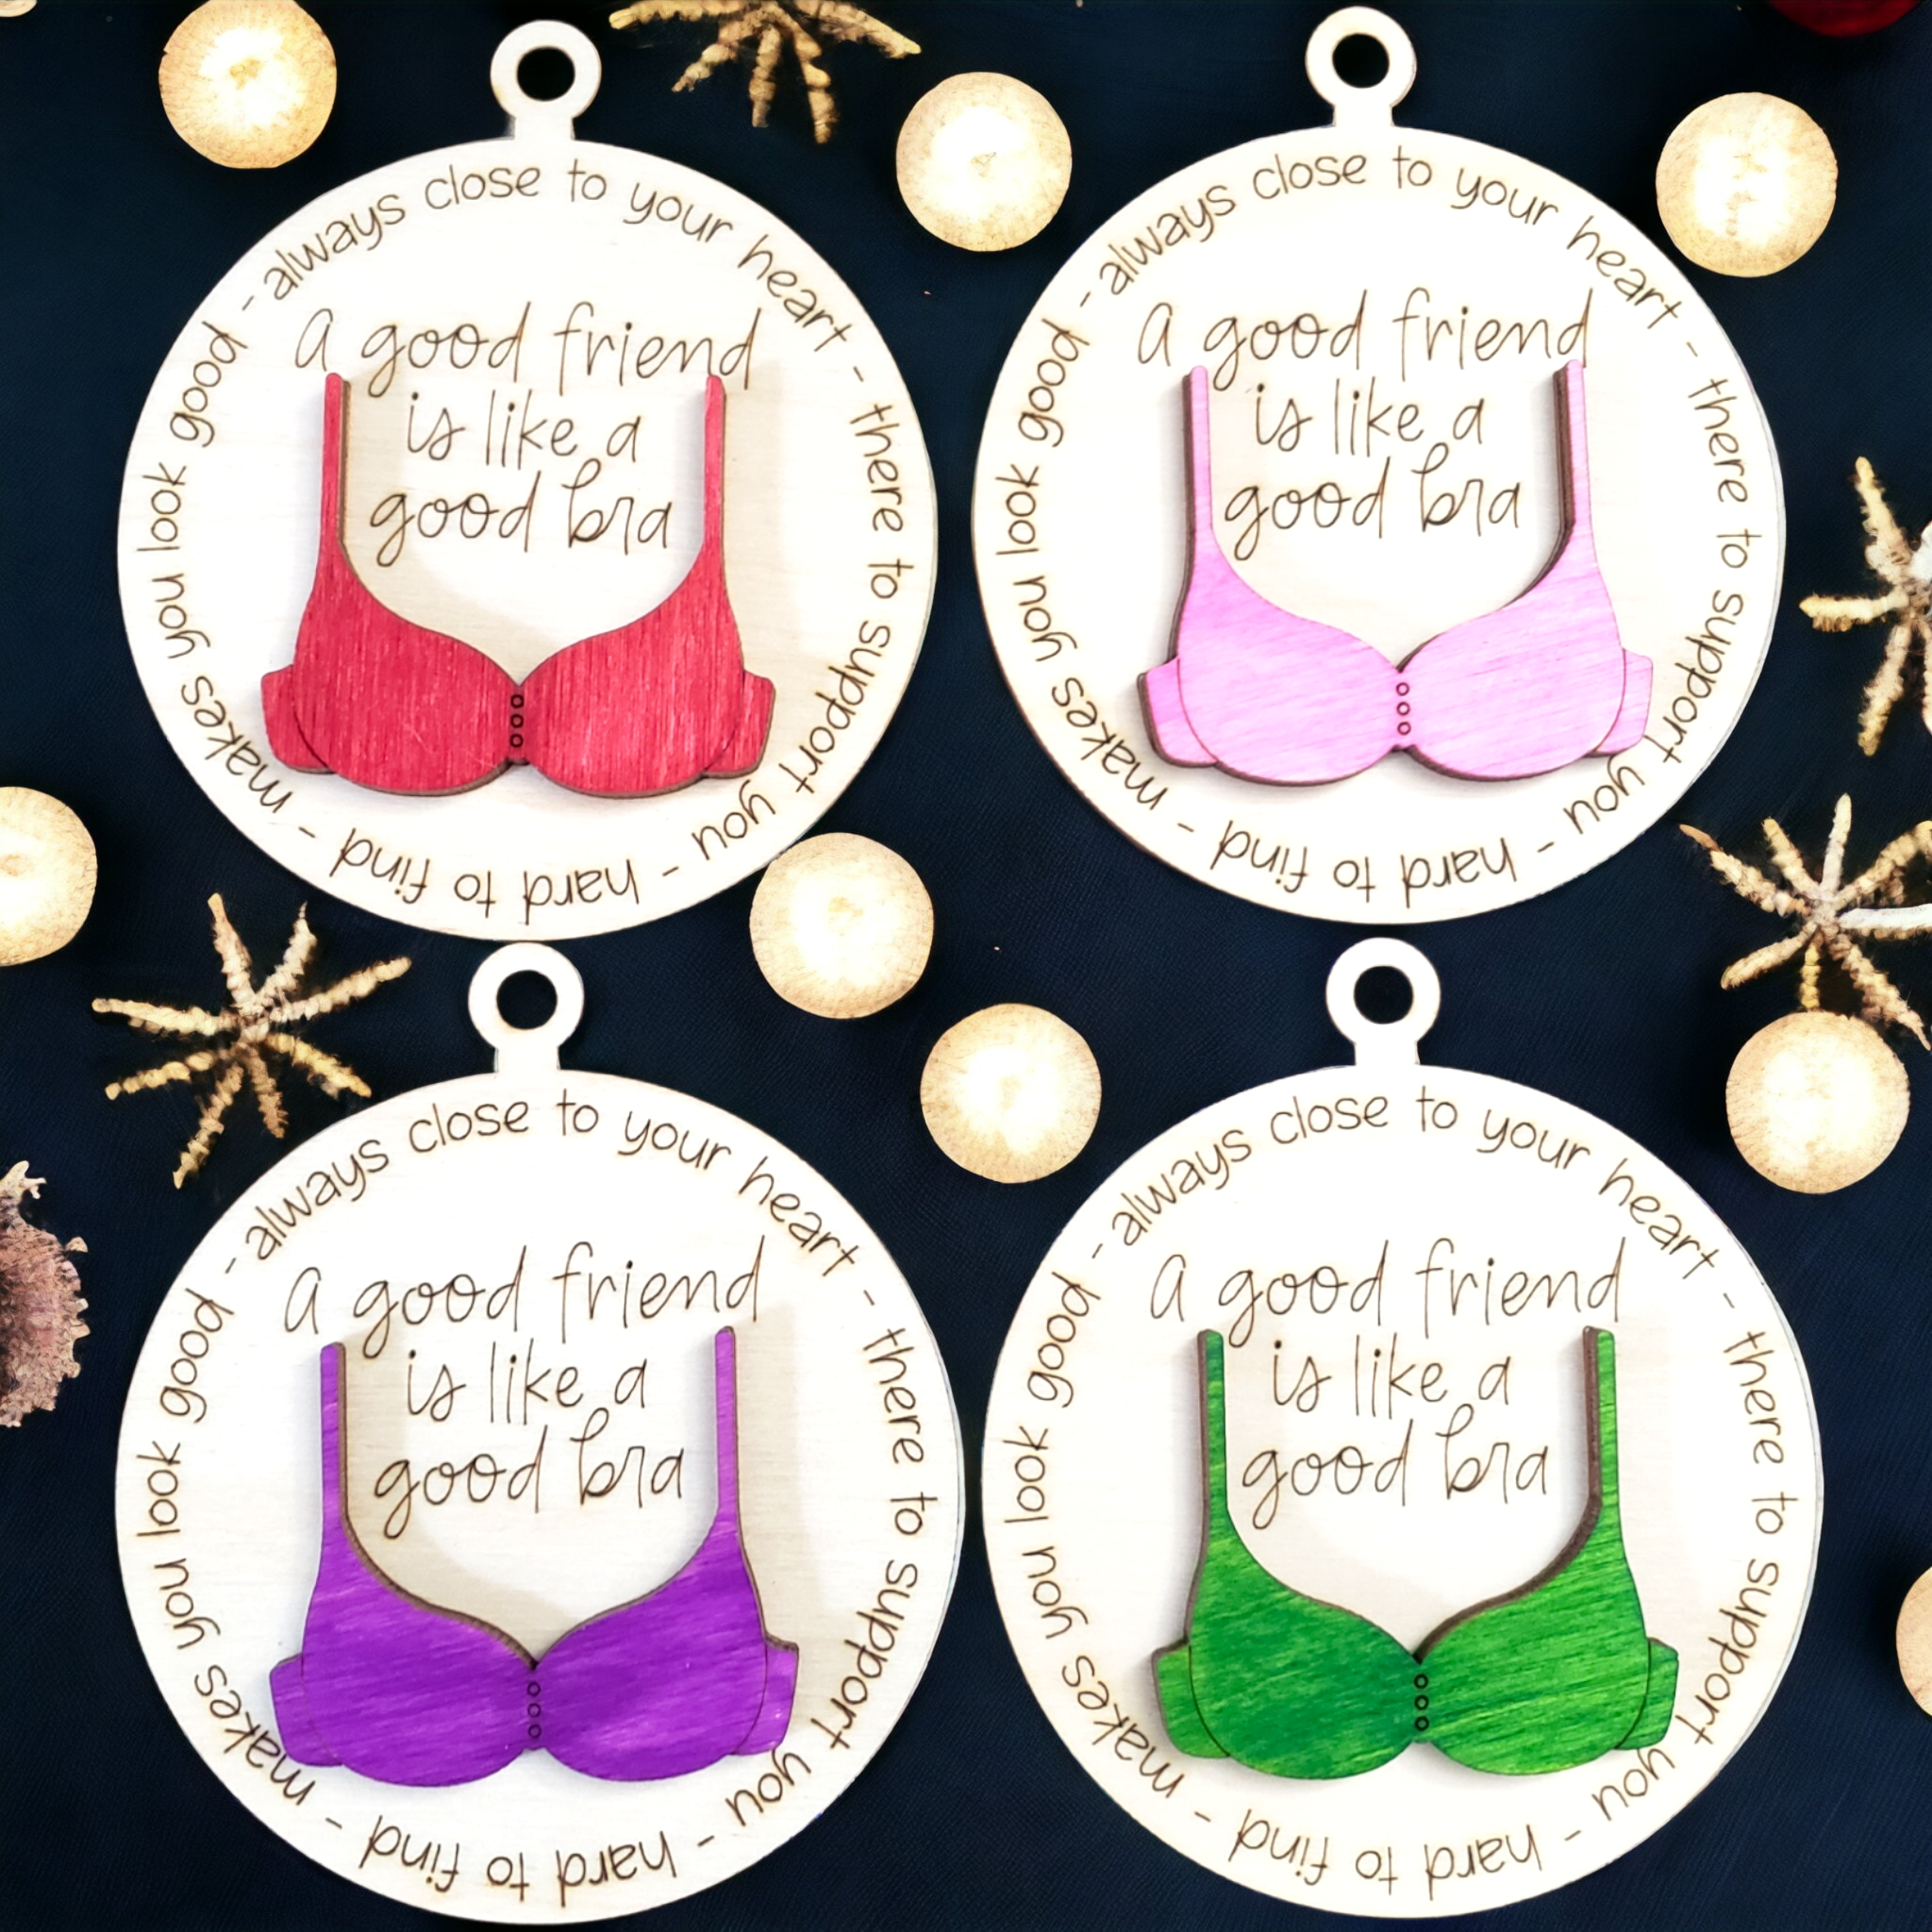 A Good Friend is Like A Good Bra' Funny Ornament Hanging Christmas